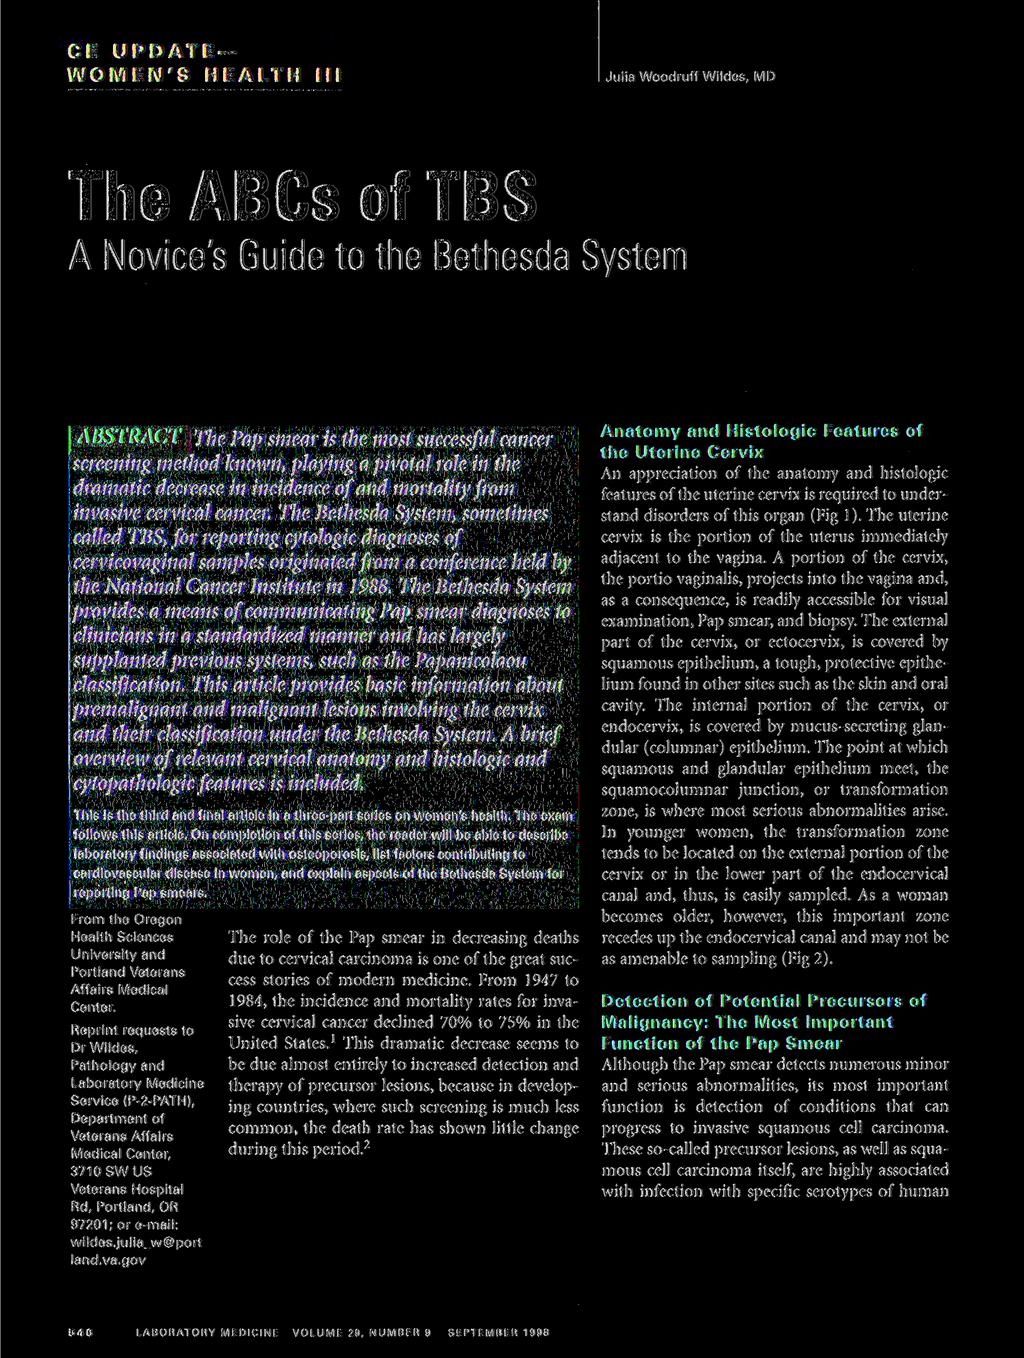 CE U P D A T E W O M E N ' S HEALTH III Julia Woodruff Wildes, MD The ABCs of TBS A Novice's Guide to the Bethesda System This is the third and final article in a three-part series on women's health.